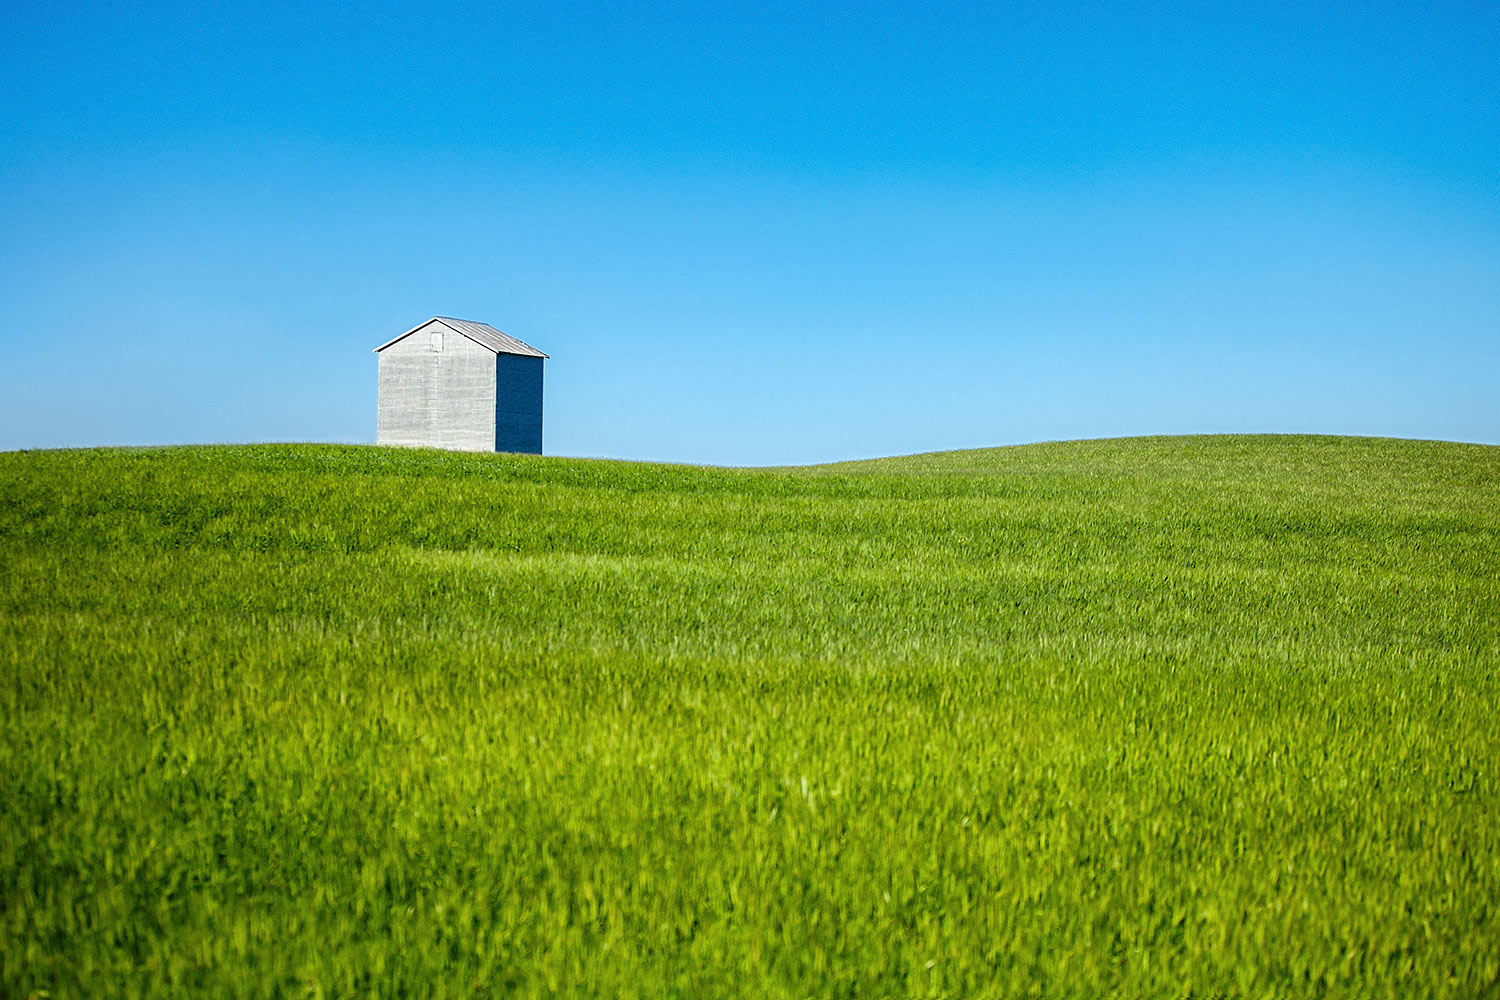 A metallic grain bin sits alone in a large field of wheat in the foreground and brilliant blue sky behind it on a rural farm near Fort Benton, Montana.&nbsp;→ Buy a Print&nbsp;or License Photo